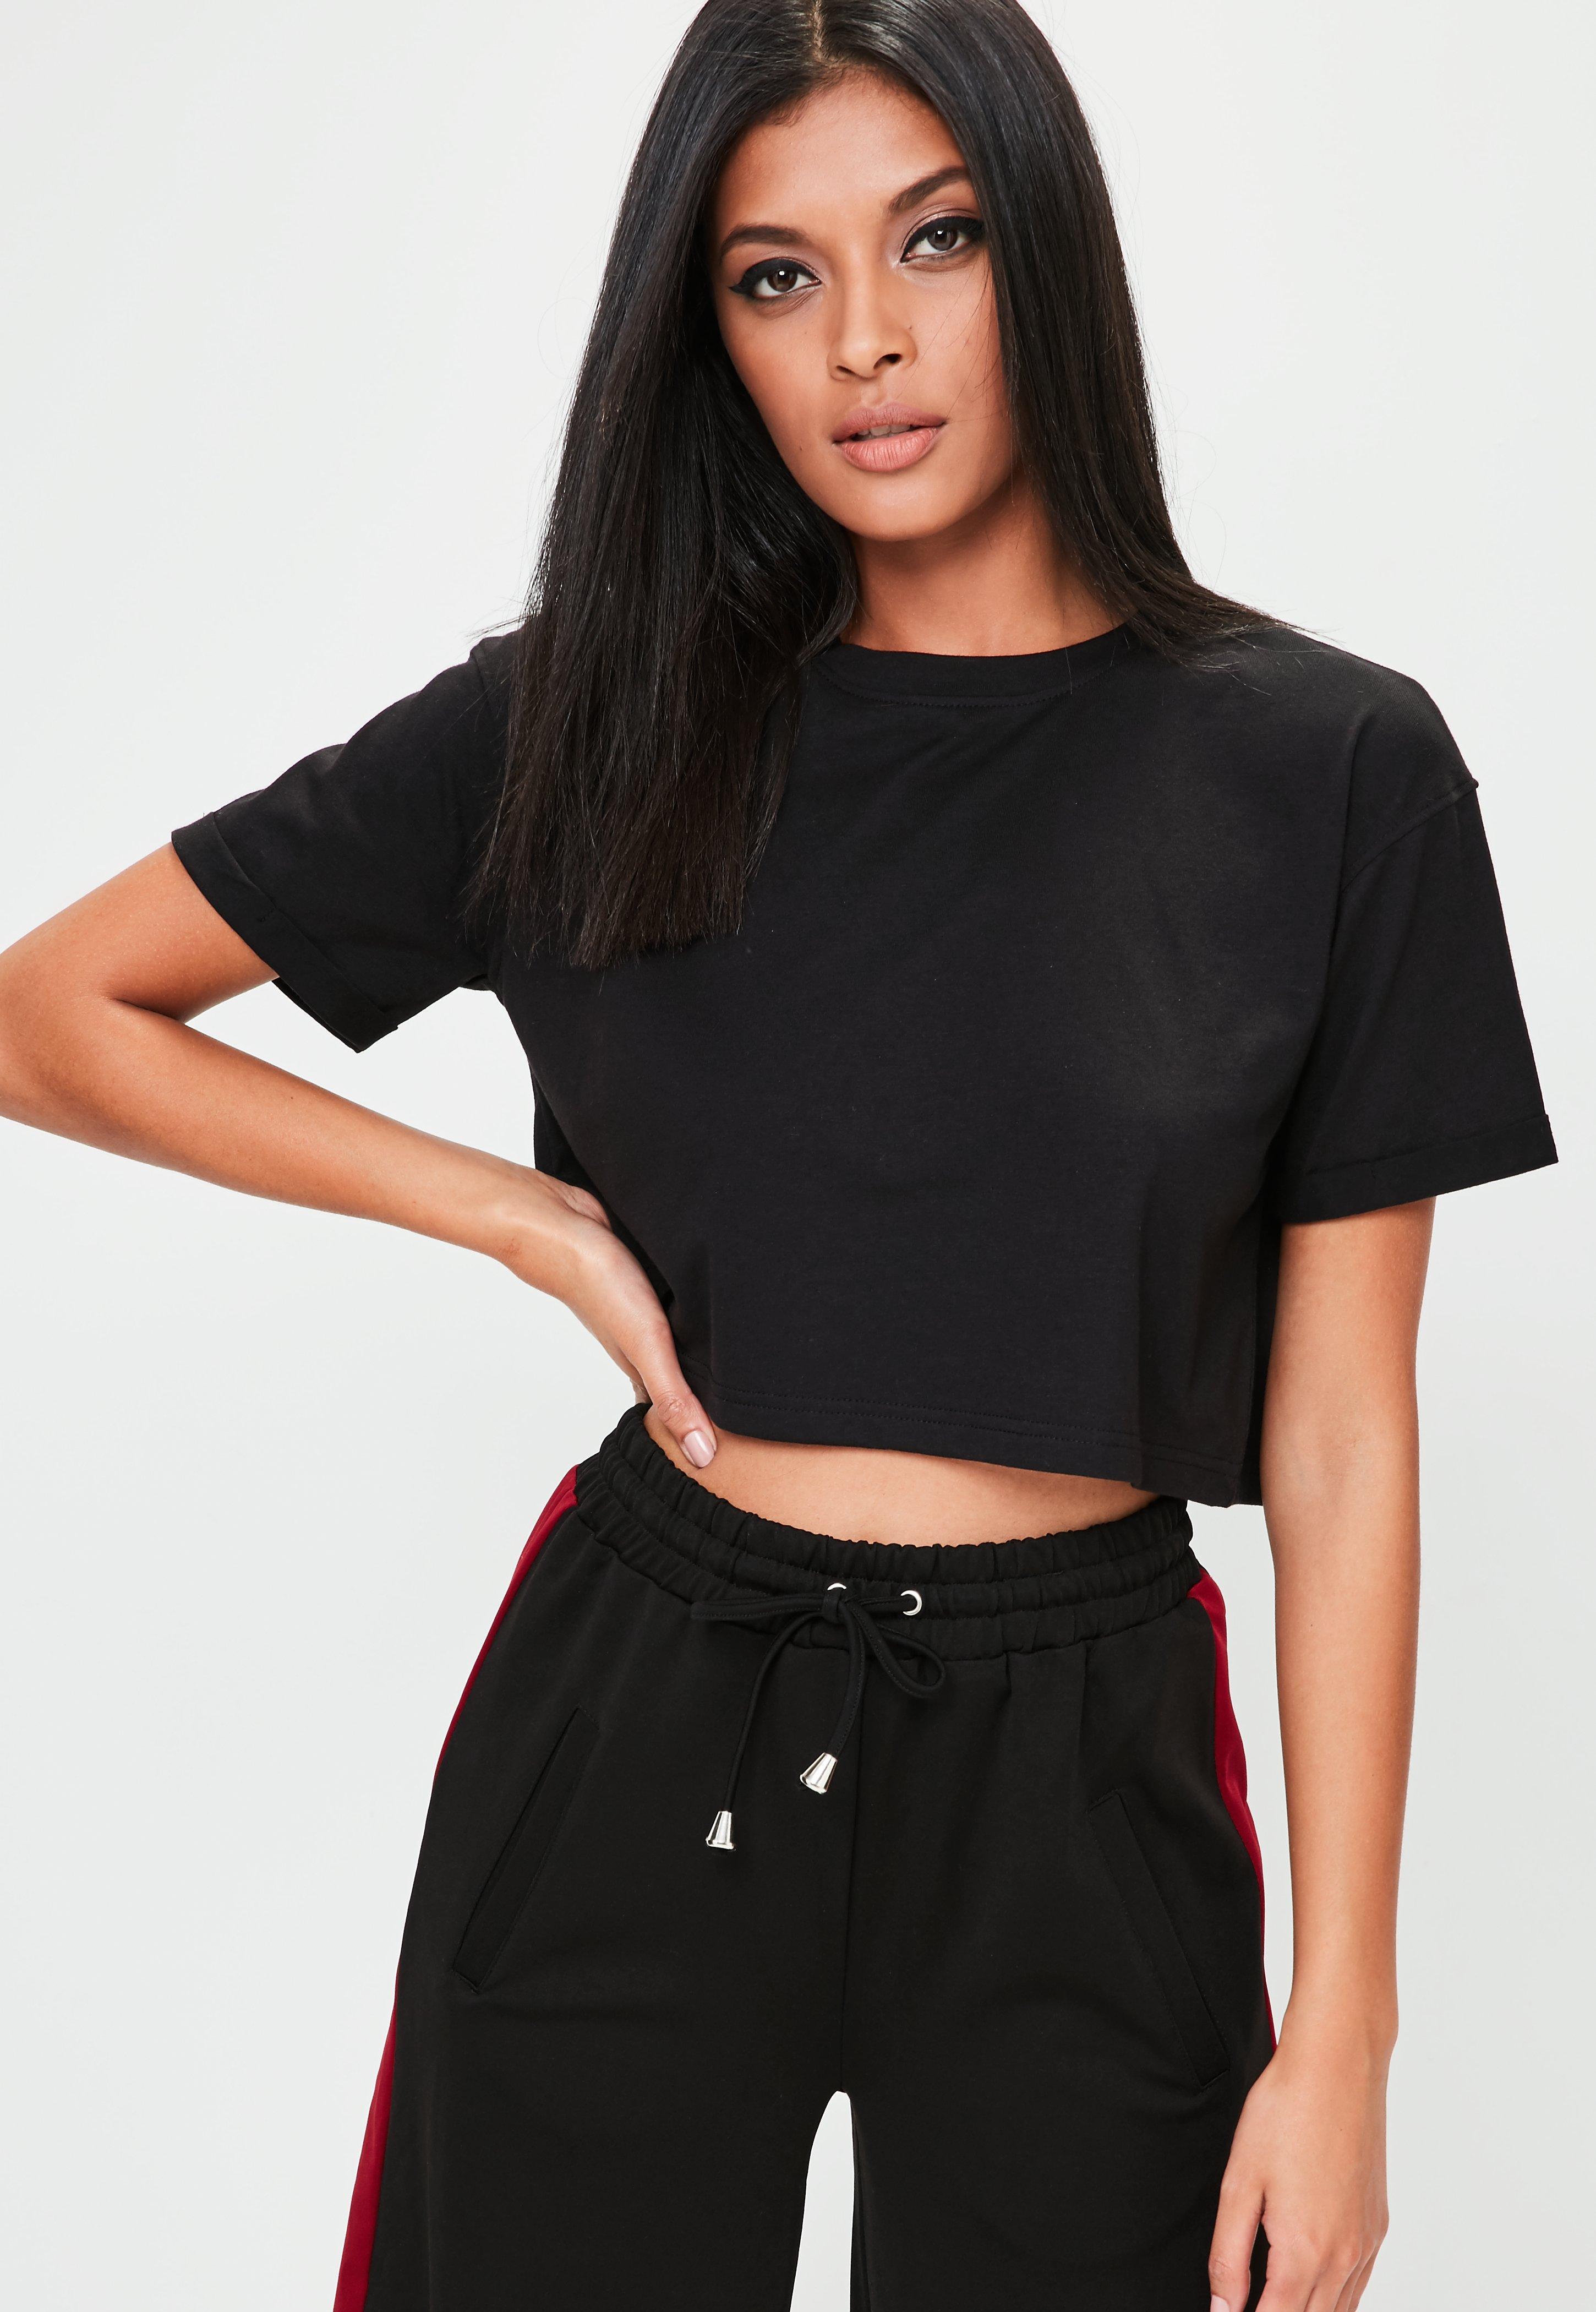 Cute Black and White Female Logo - T-Shirts & Women's Tees - Missguided